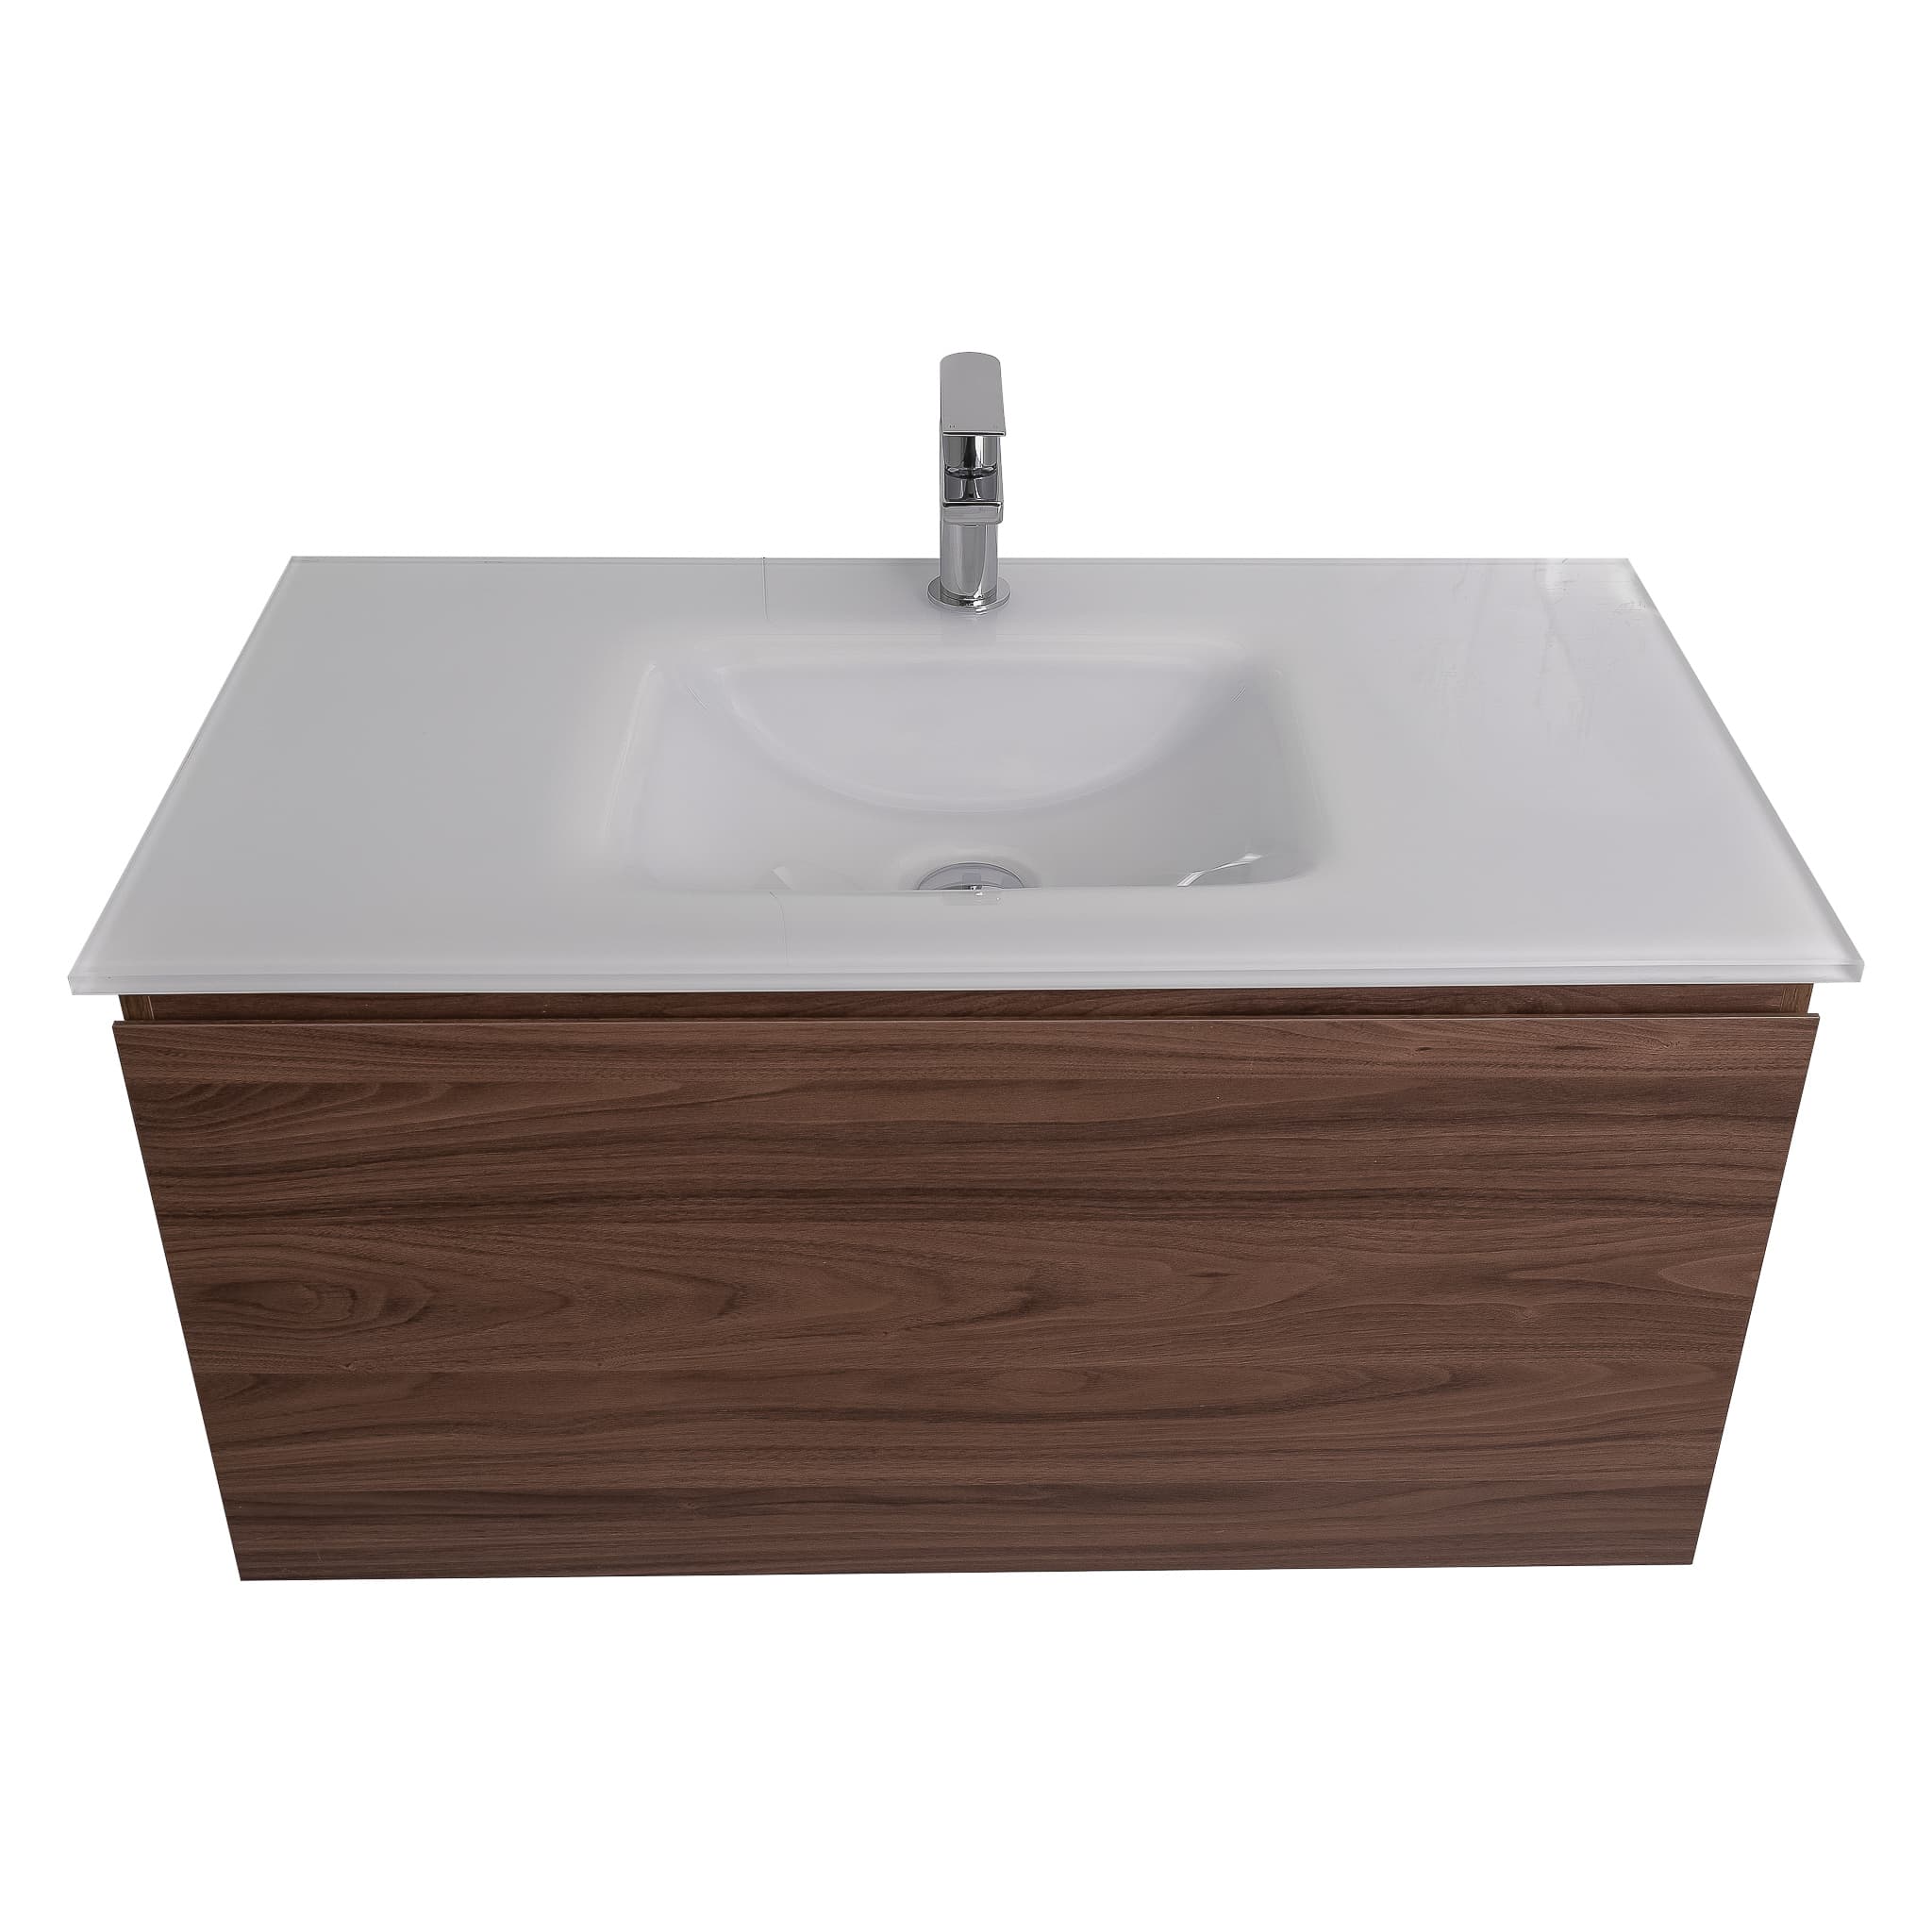 Venice 31.5 Walnut Wood Texture Cabinet, White Tempered Glass Sink, Wall Mounted Modern Vanity Set